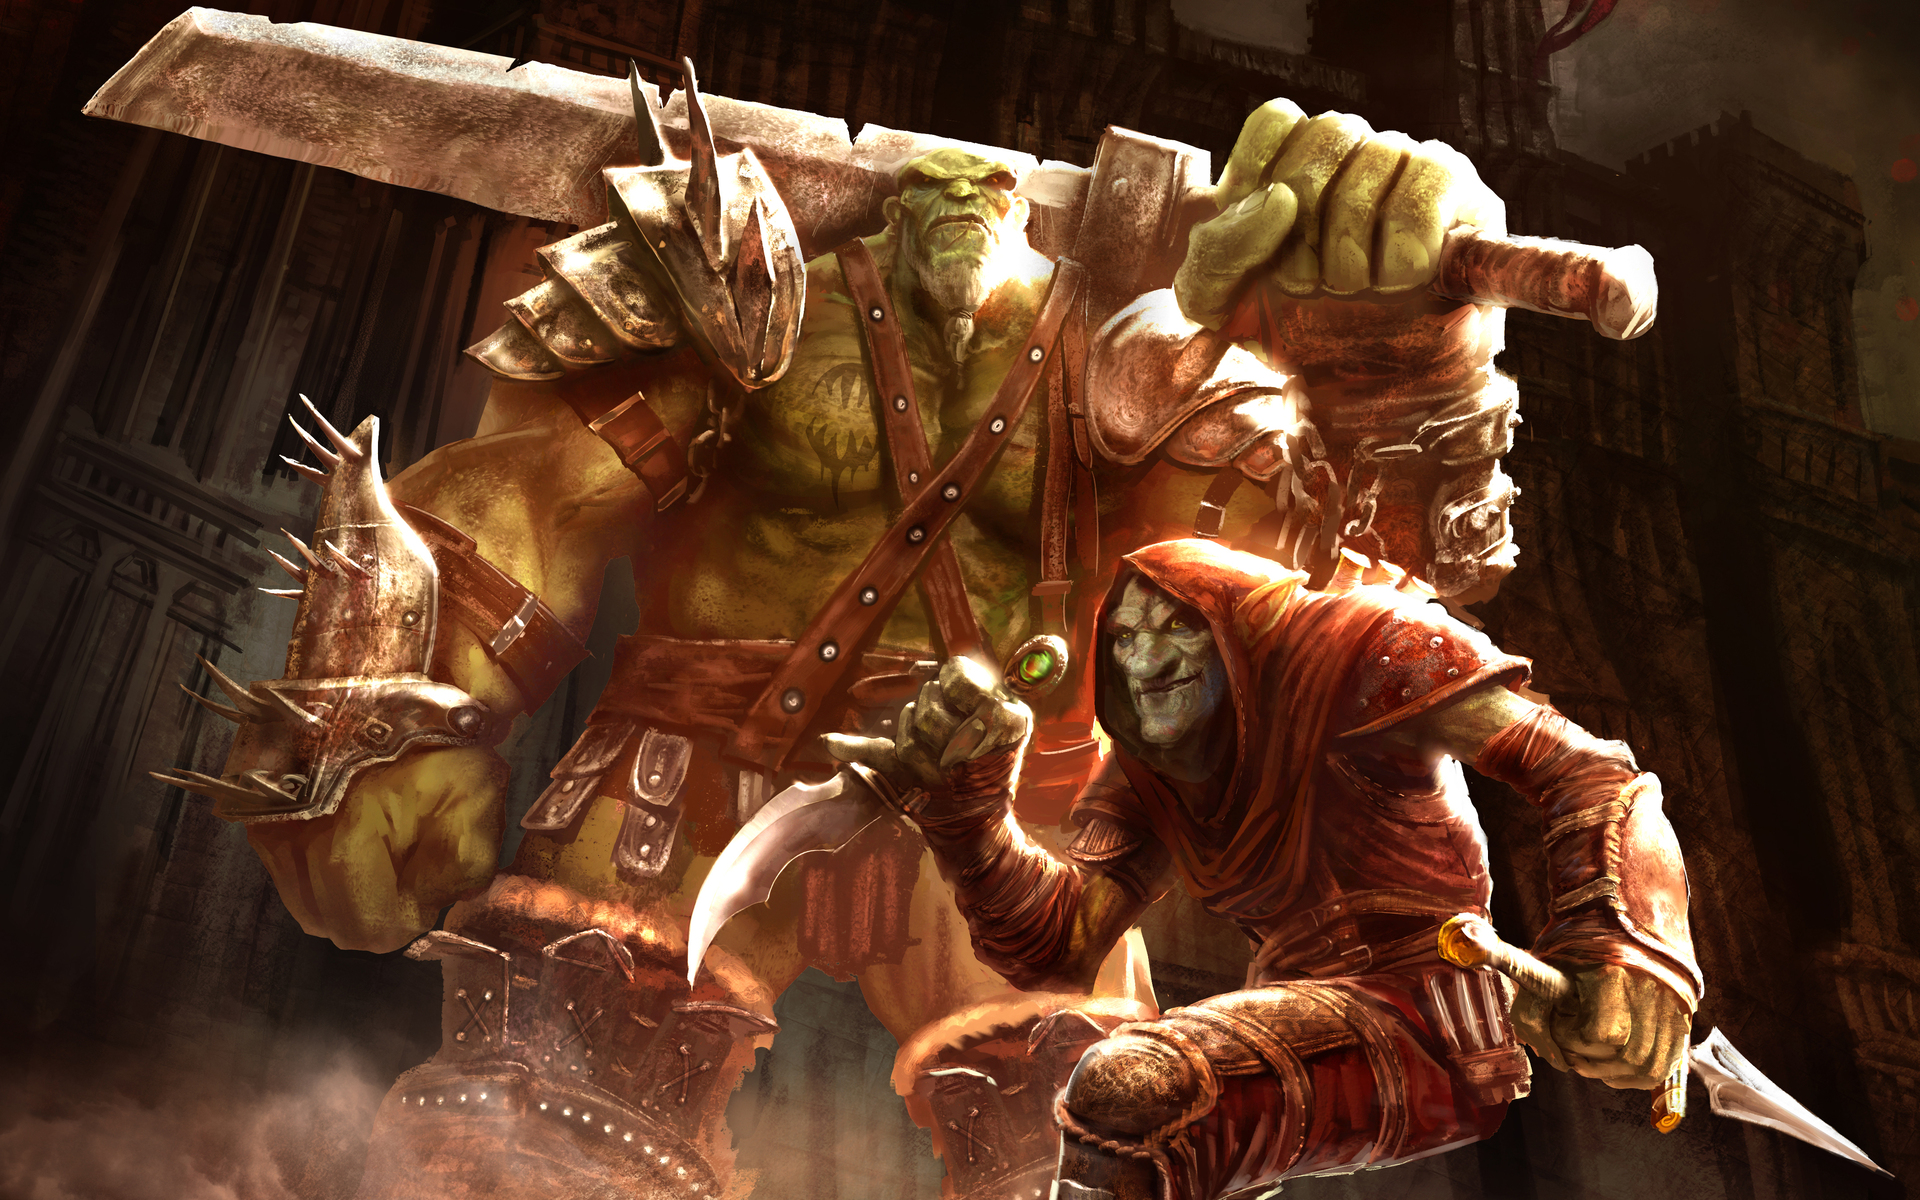 of orcs and men, Games, Video games, Fantasy, Monsters, Creatures, Orcs, Weapons, Swords, Knives, Warriors Wallpaper